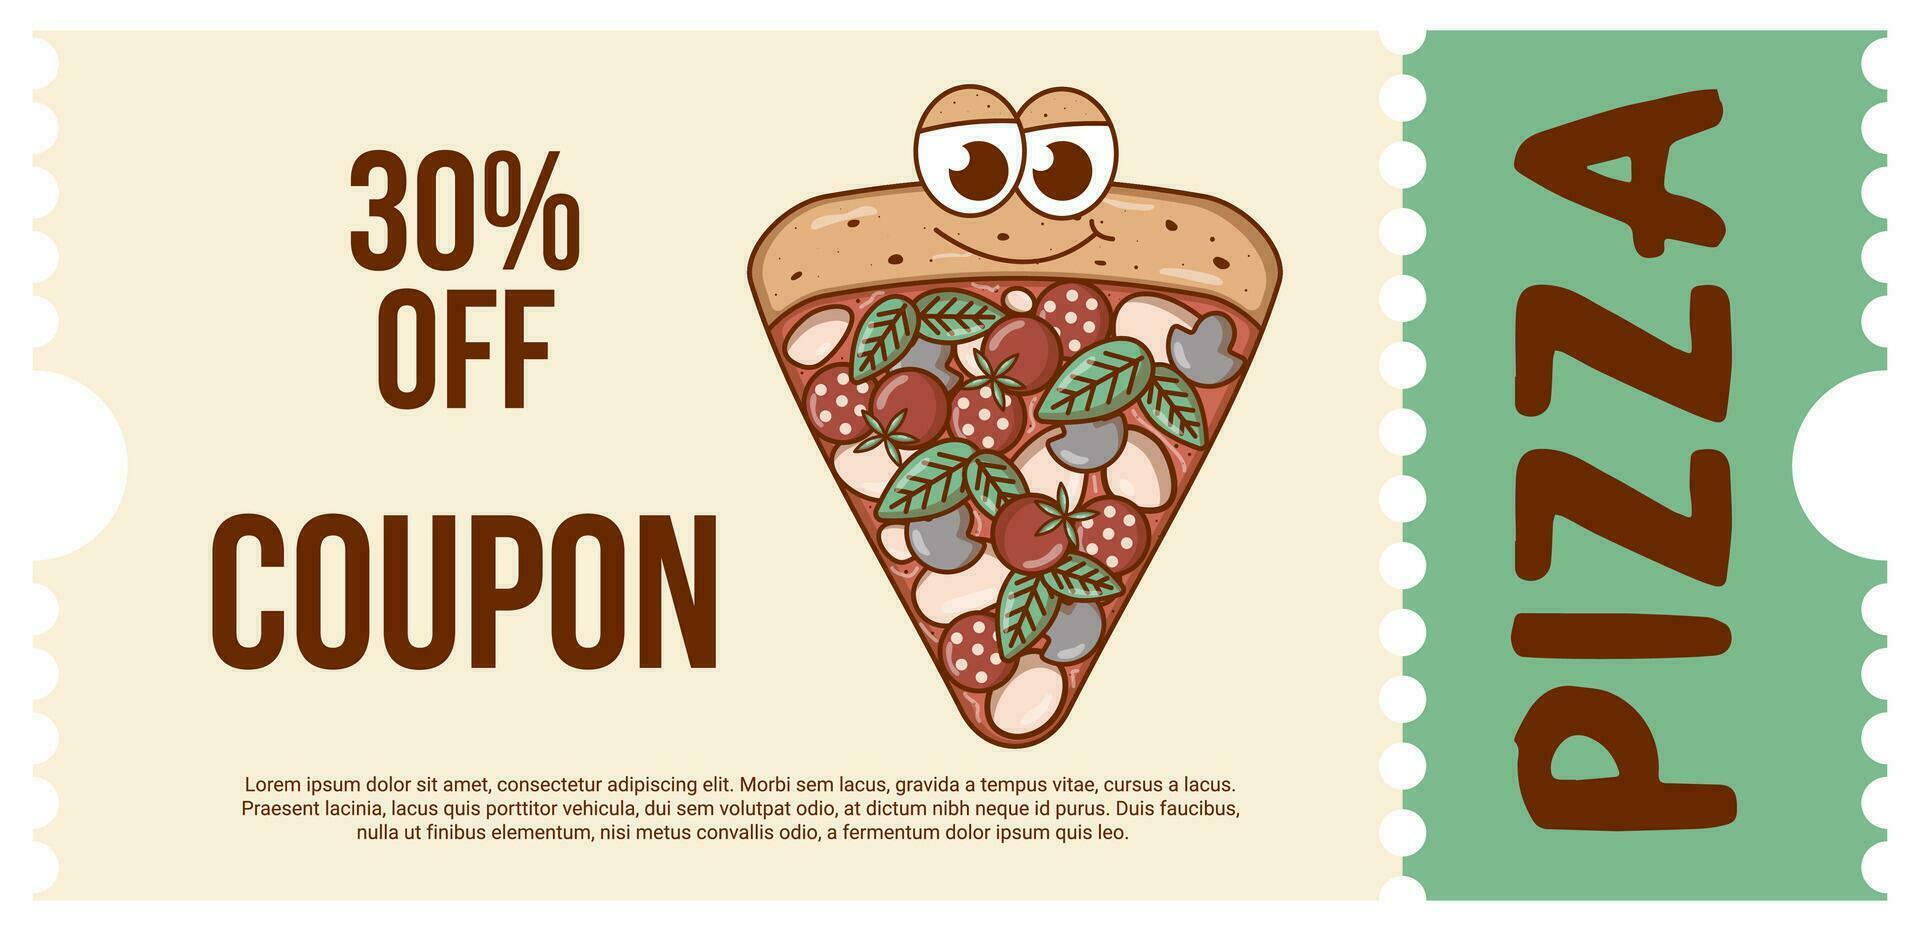 Italian fast food piece character pizza. Coupon promotion, discount banner, gift voucher. Retro colors. Flat style. Vector illustration.